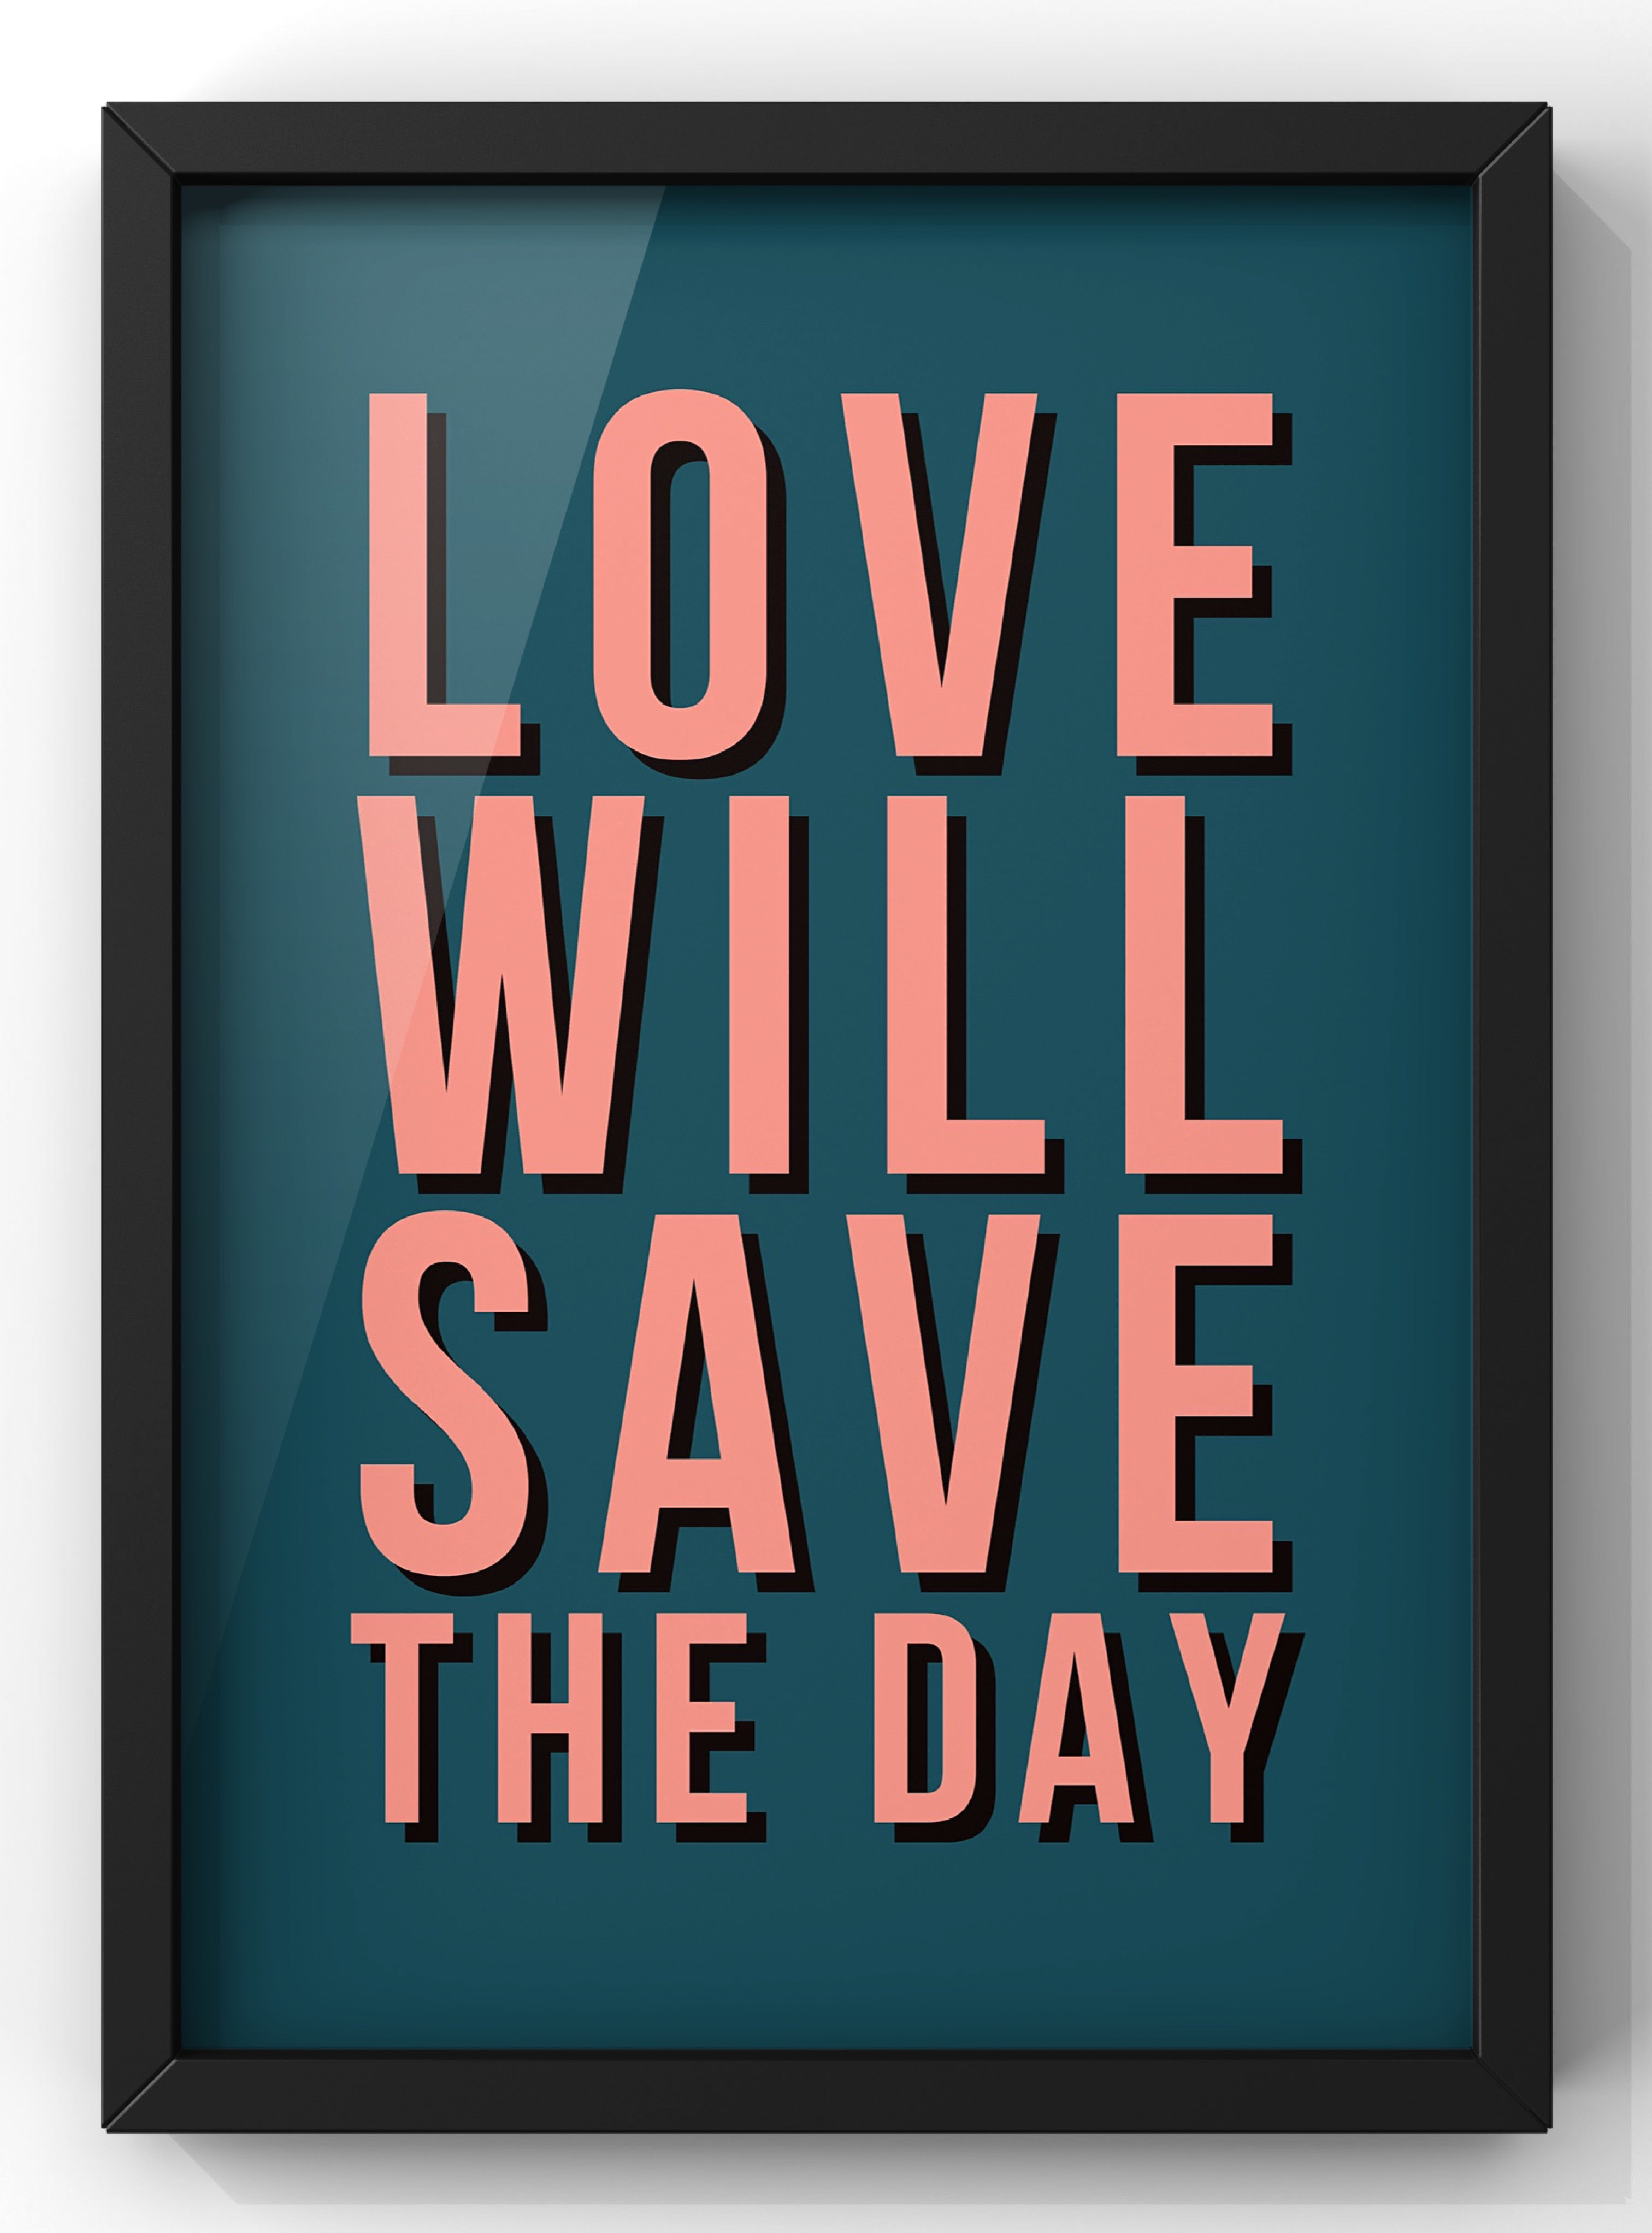 Love Will Save the Day - Wikipedia